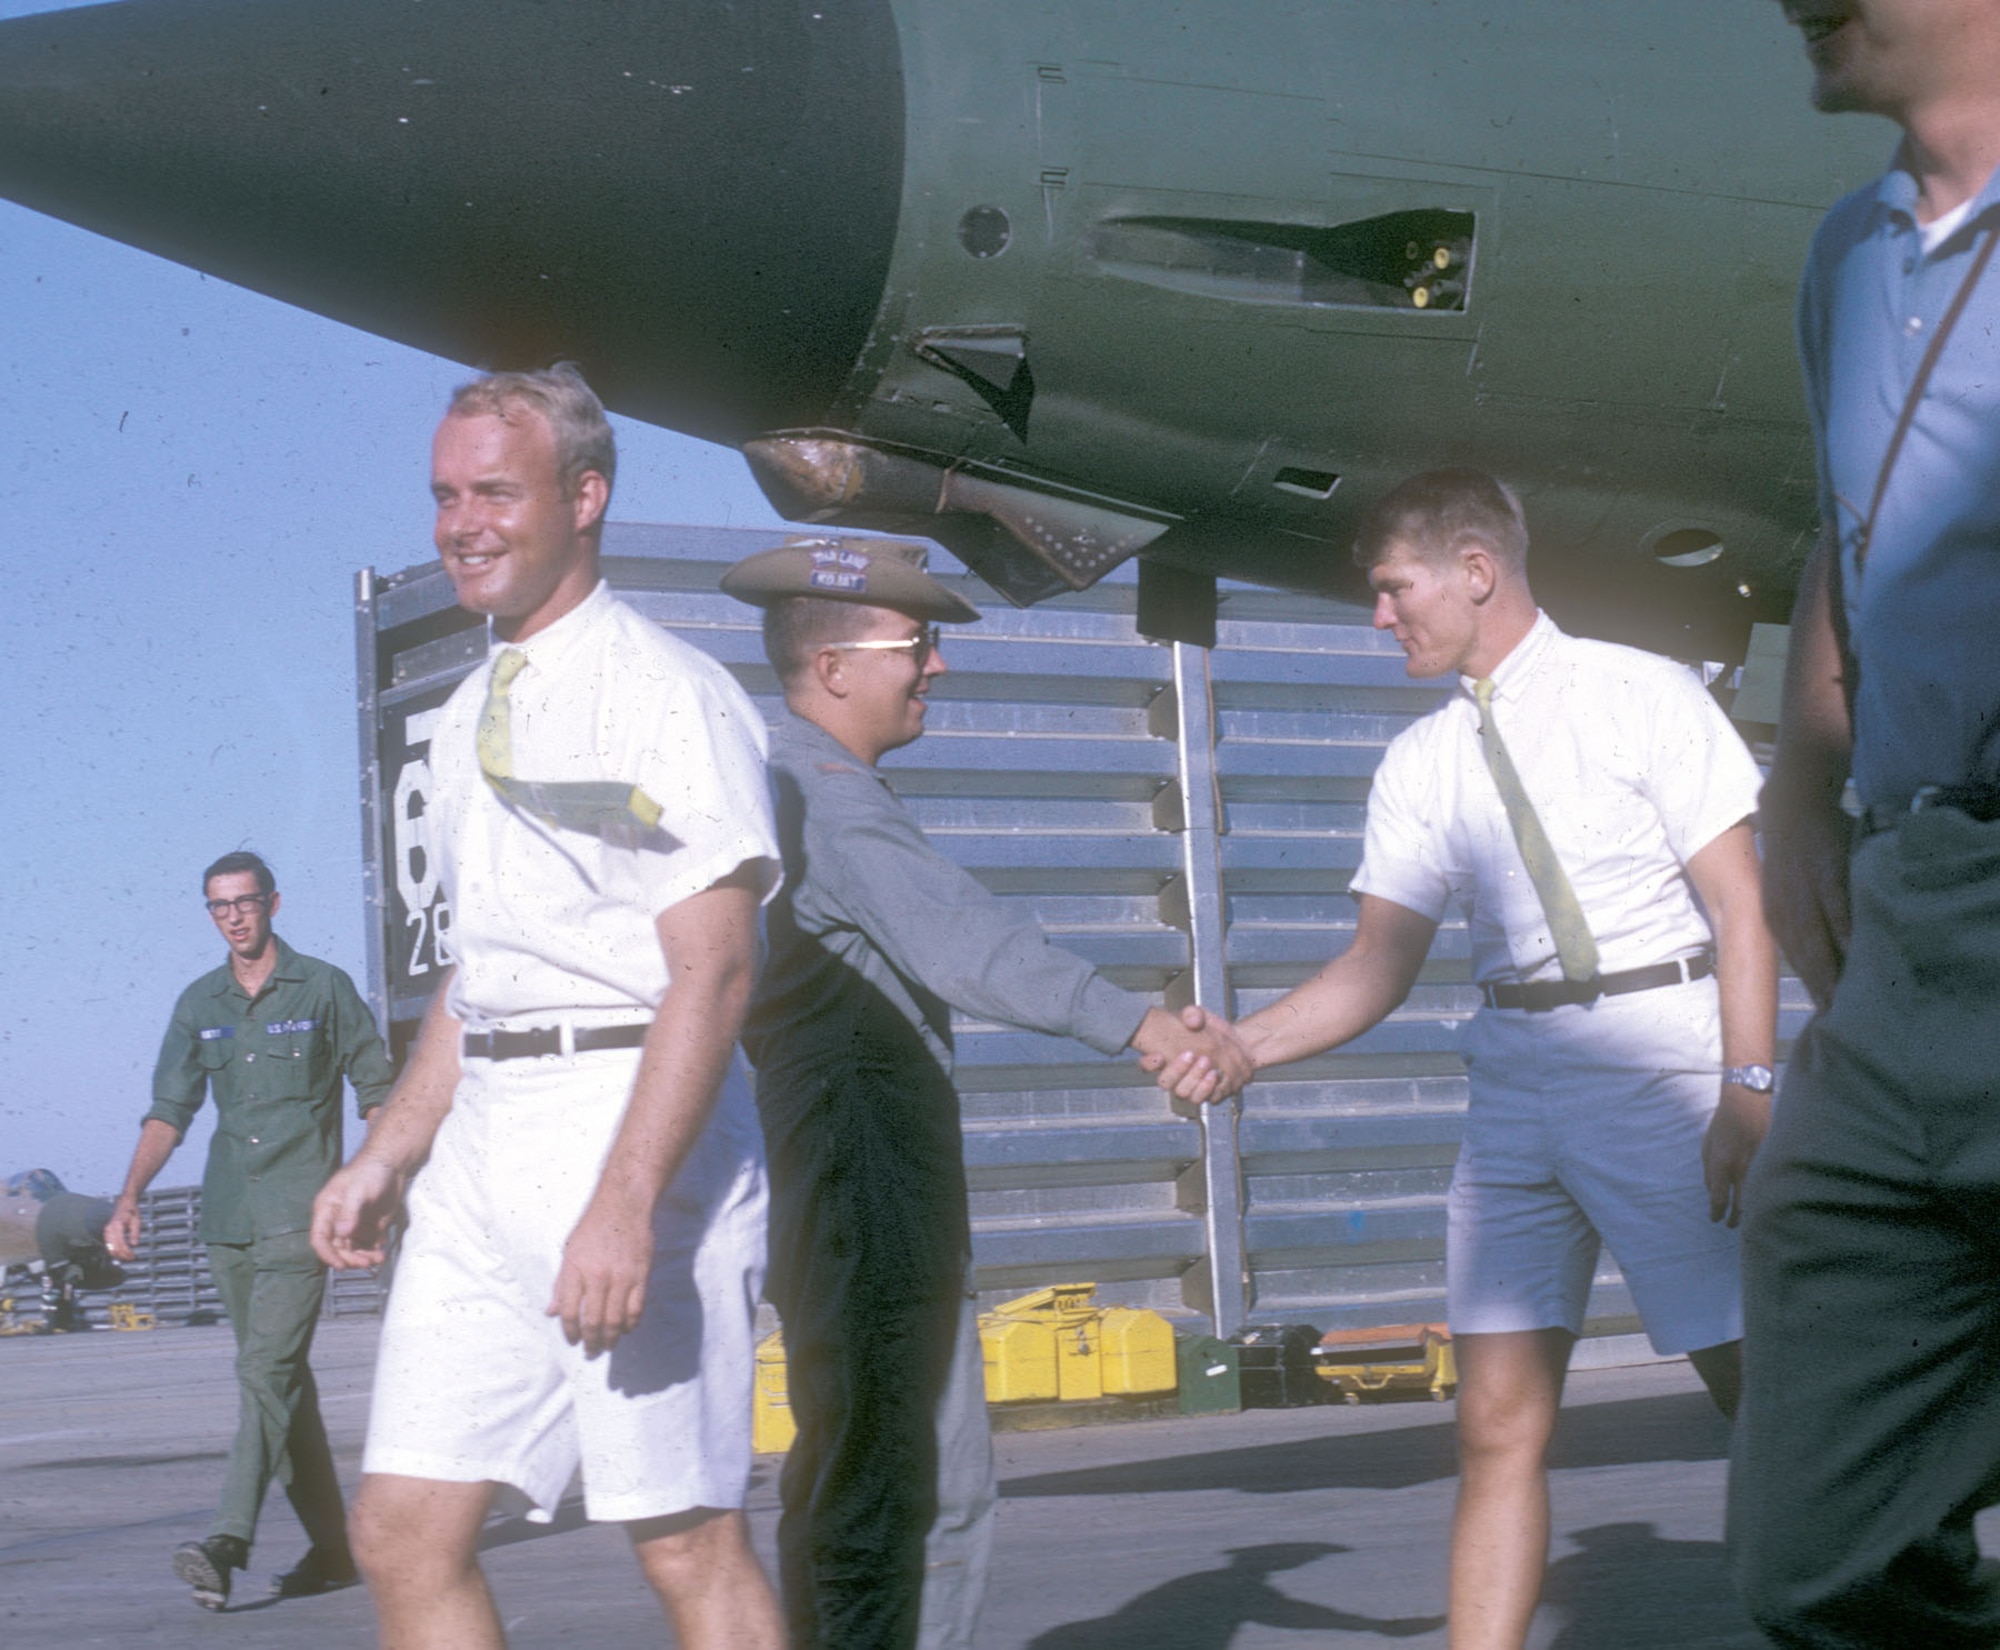 As a joke, Williams (r) and his pilot, Rowland “Smitty” Smith (l), secretly decided to wear Bermuda shorts, white shirts, and silk Thai ties under their flight suits for their last mission. They came out of the cockpits in these outfits to the surprise and laughter of those there to congratulate them. (U.S. Air Force photo)